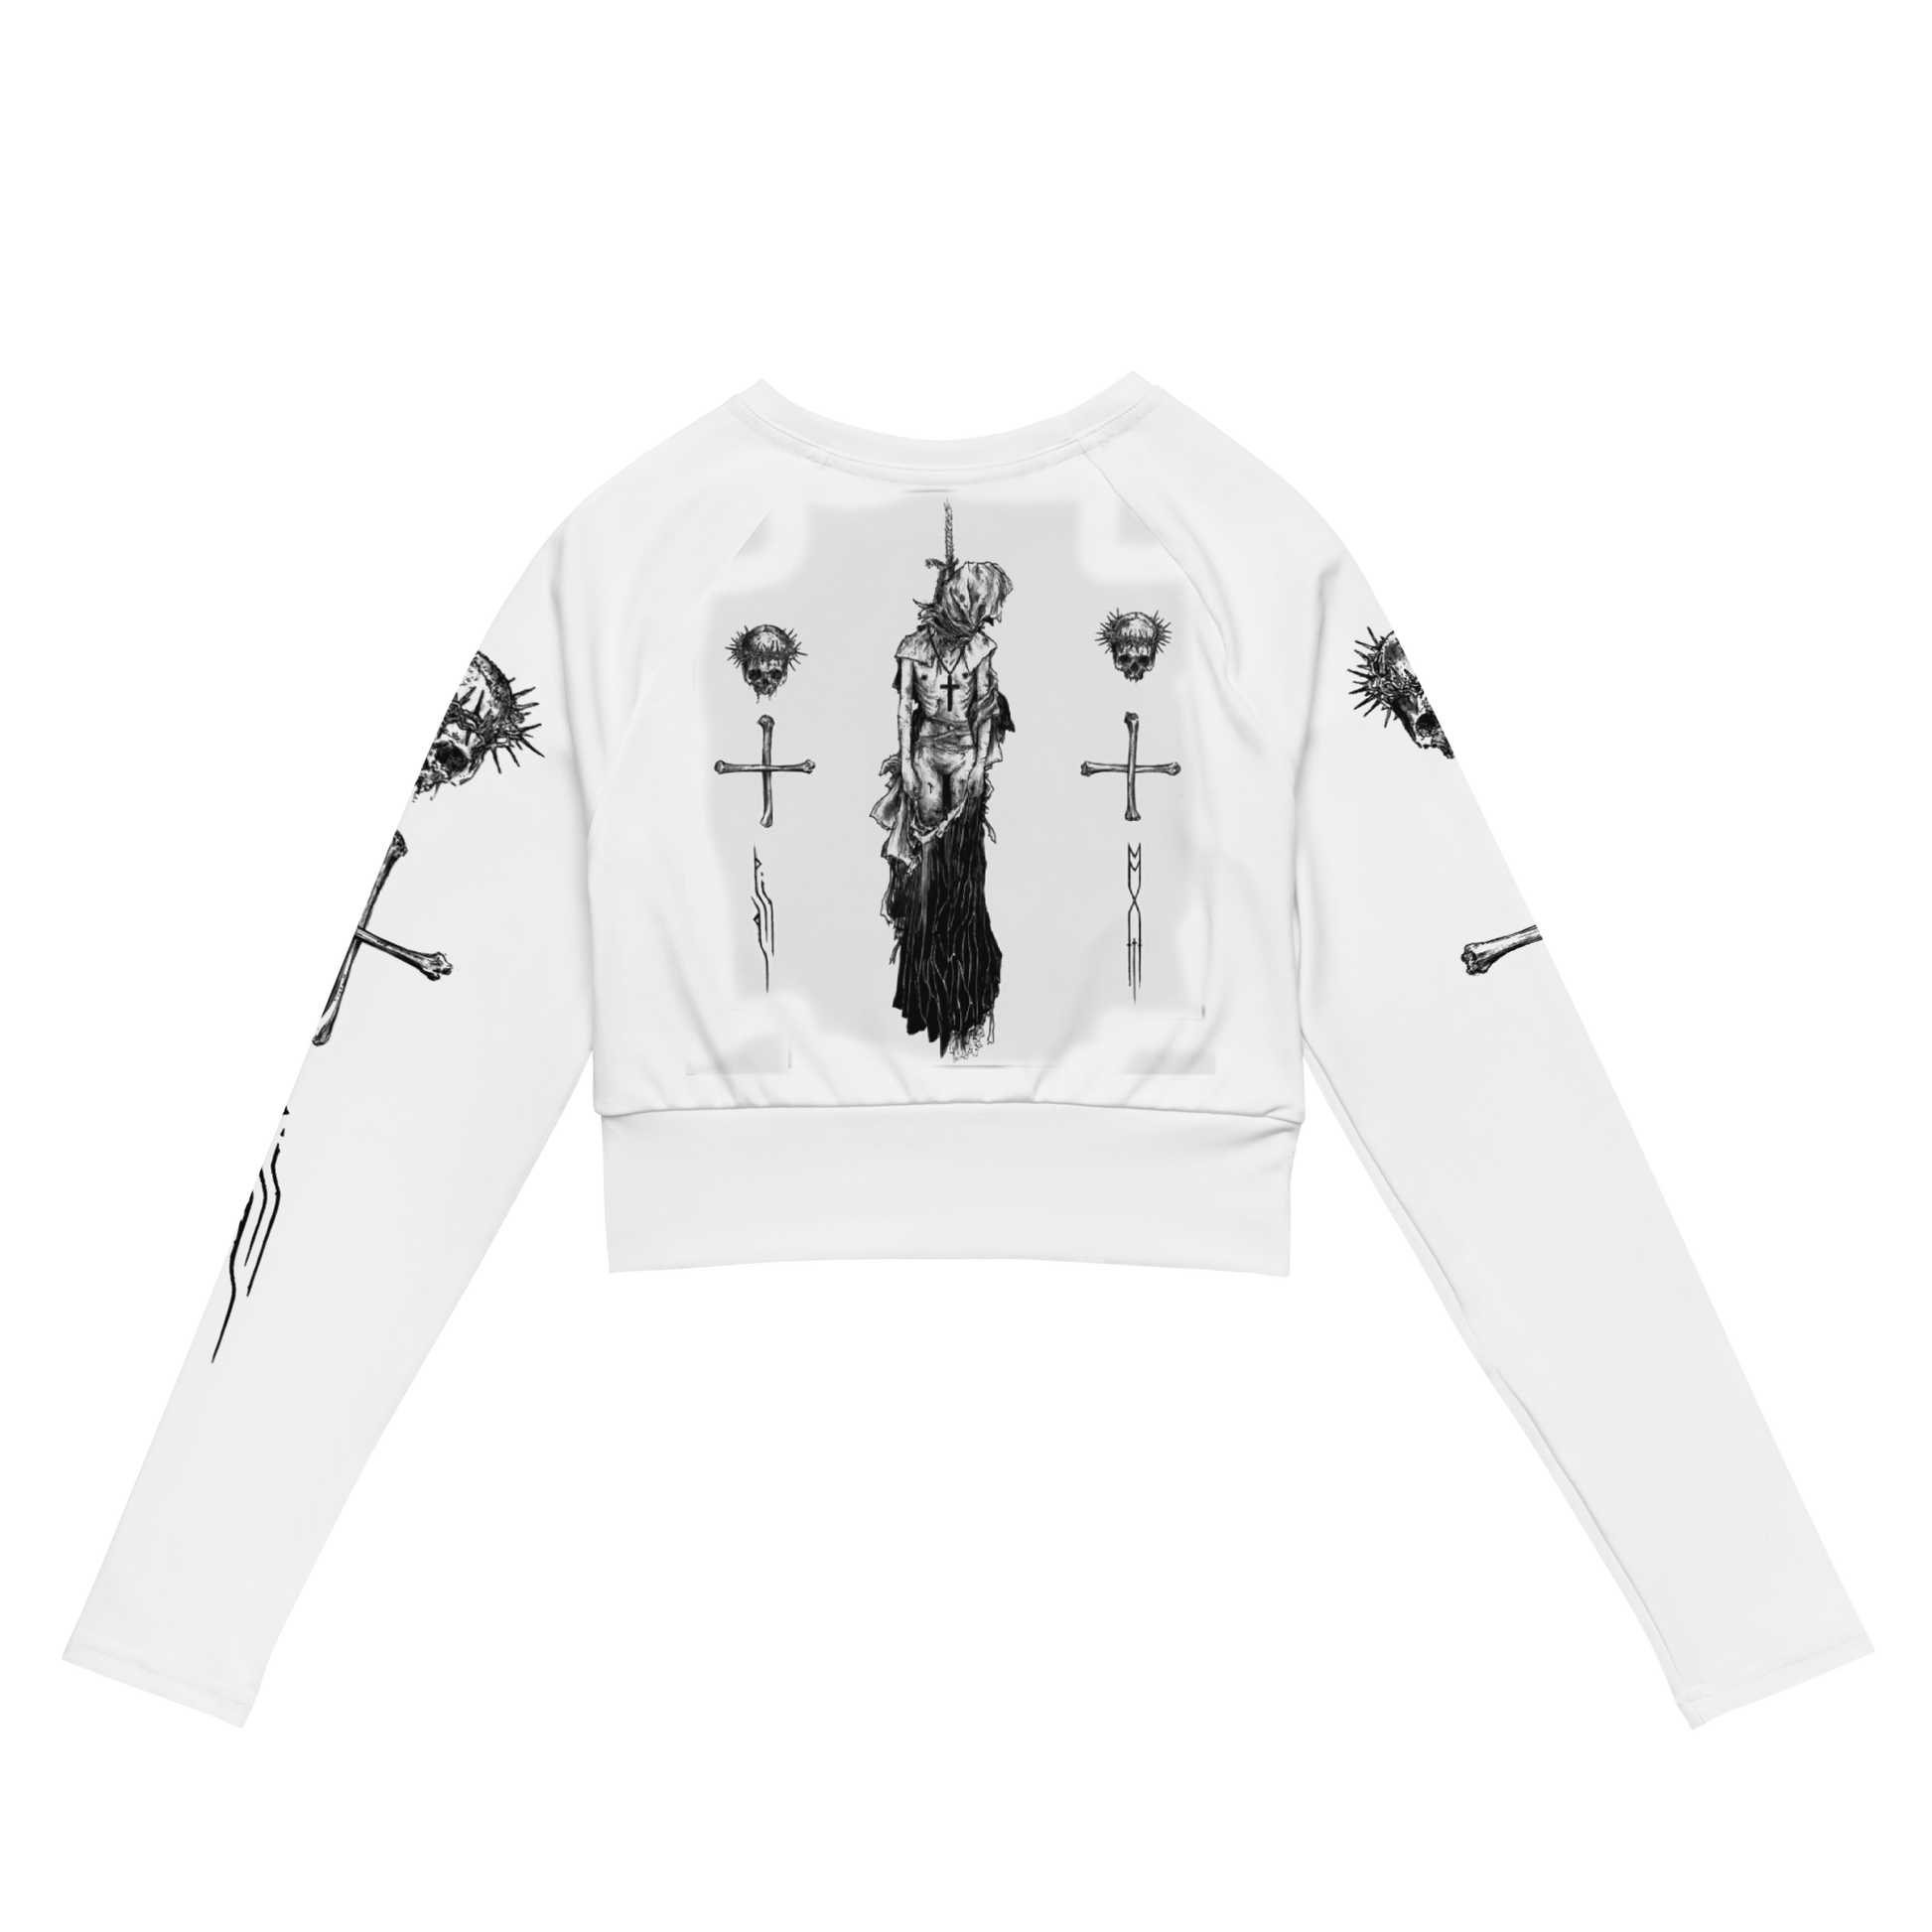 Nunslaughter Angelic Dread official long sleeve crop top by Metal Mistress